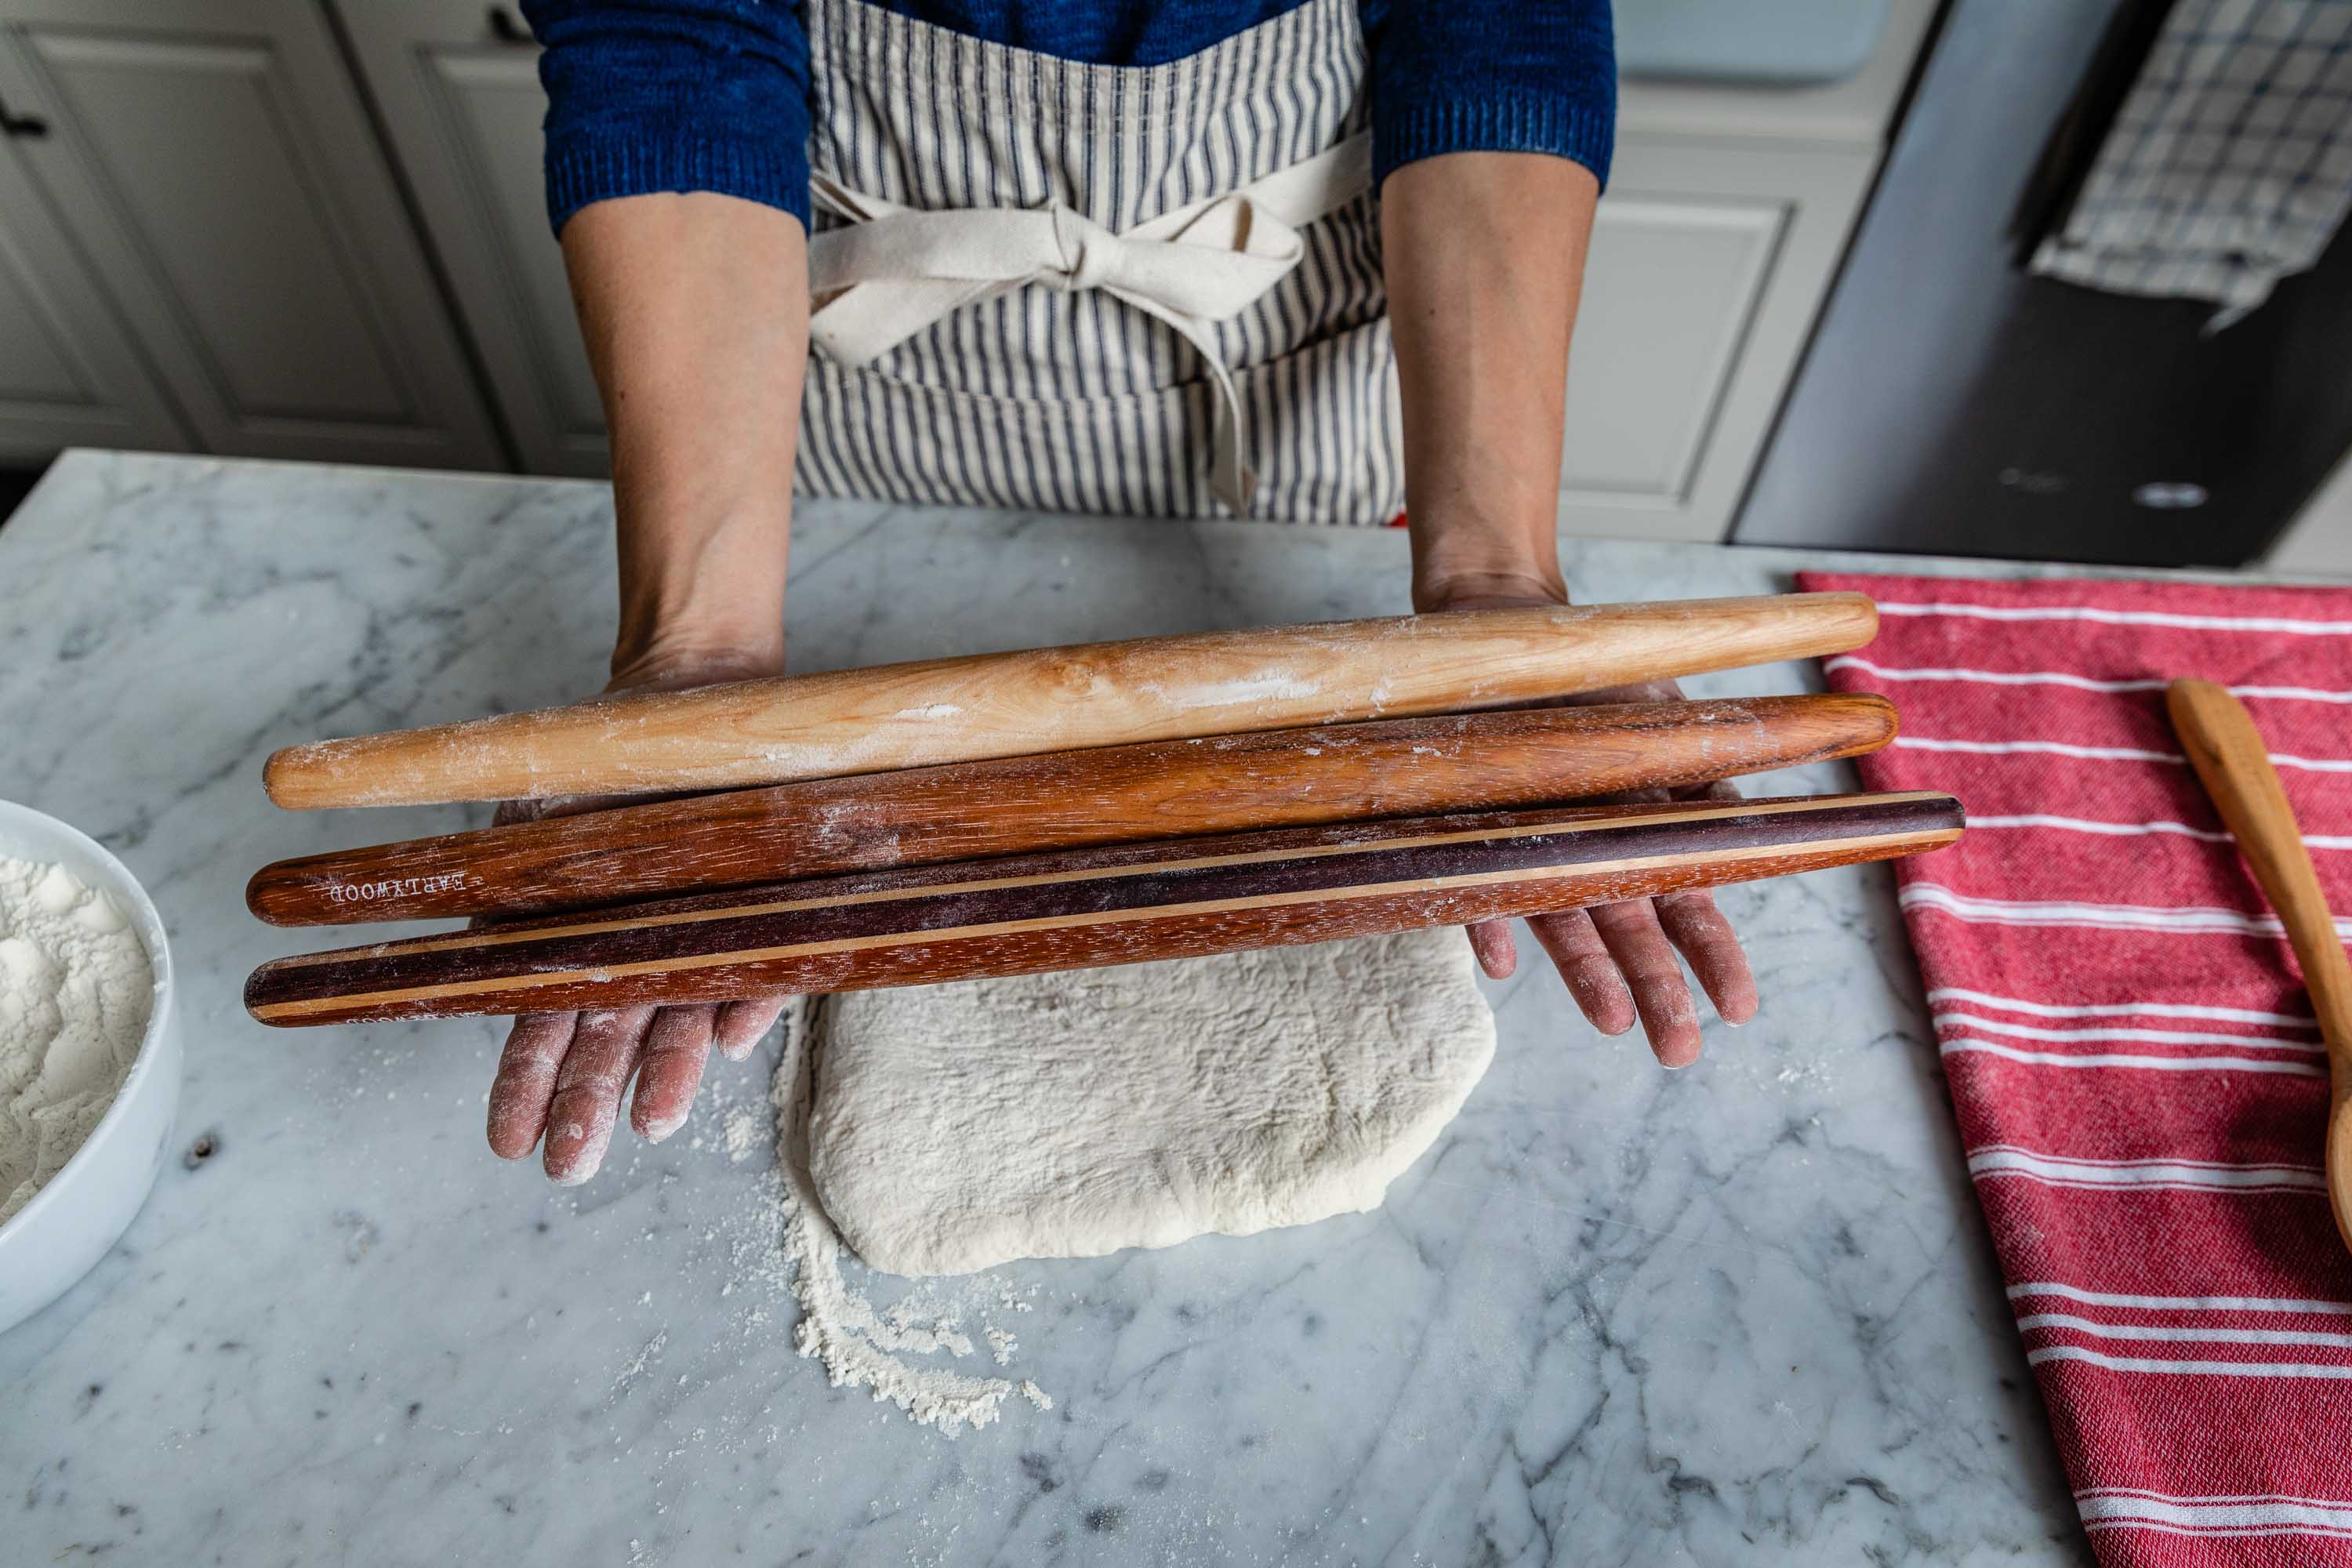 French Rolling Pin Present for Moms Who Bake